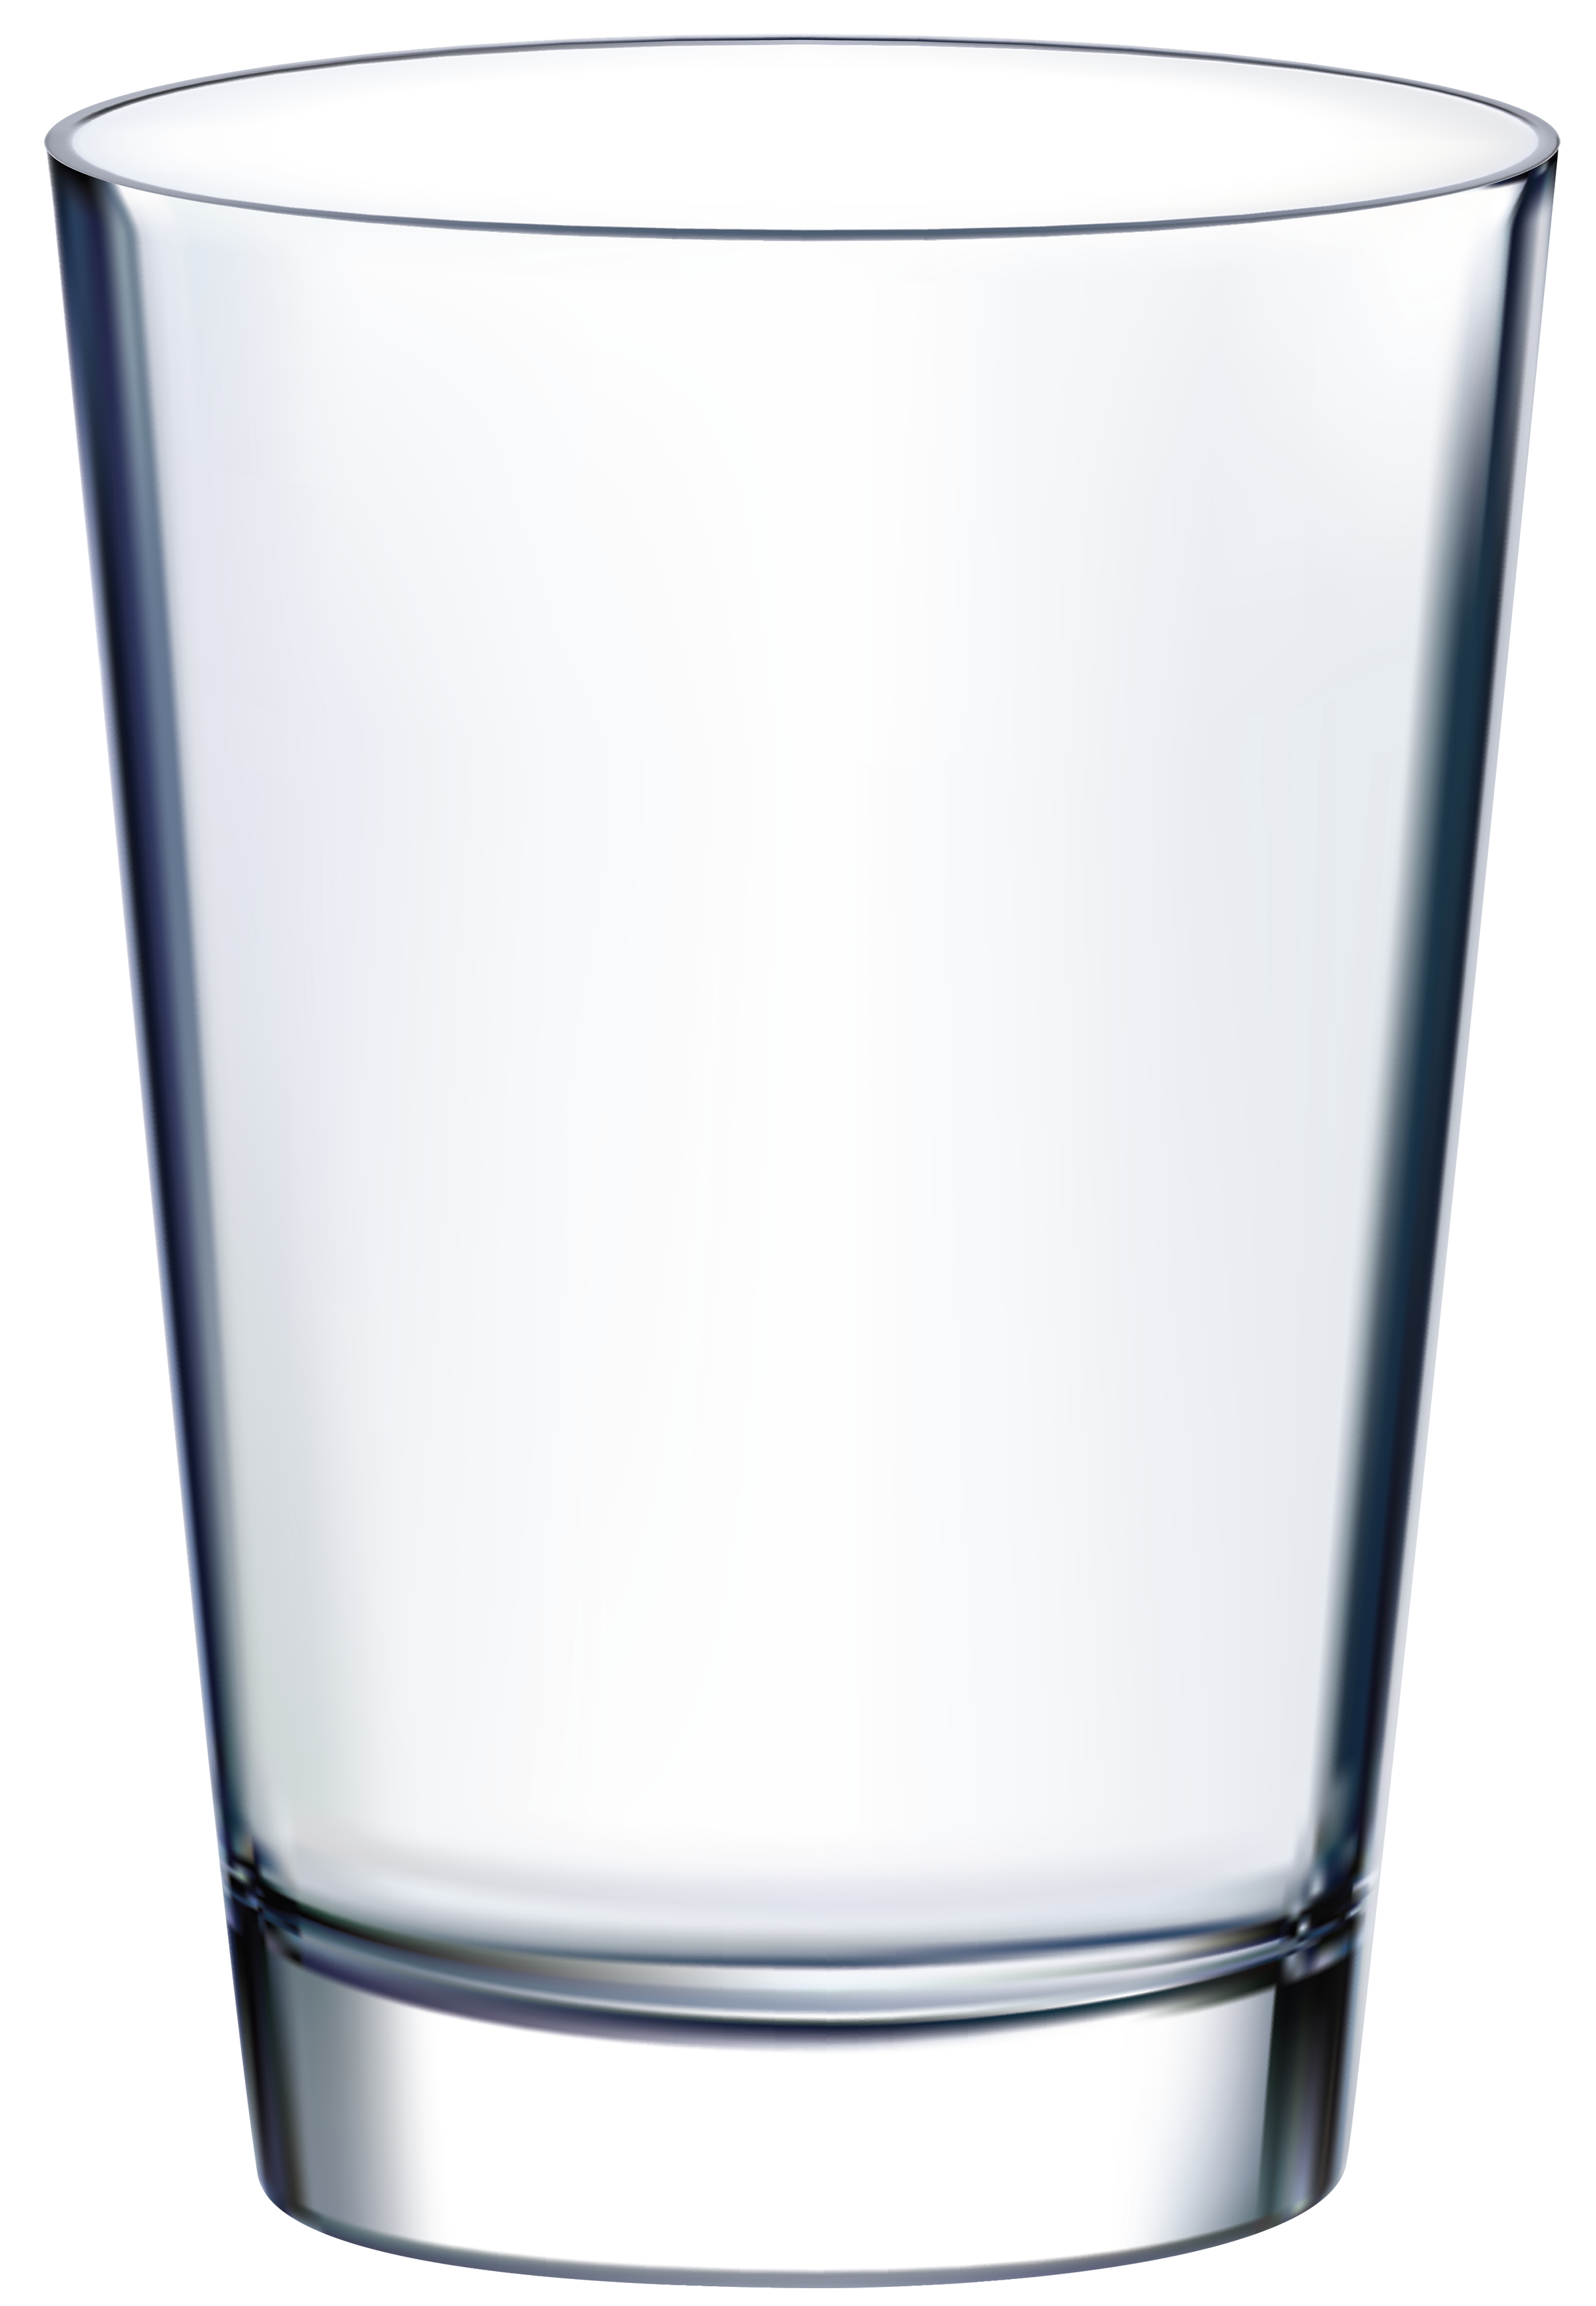 clipart of a glass - photo #16